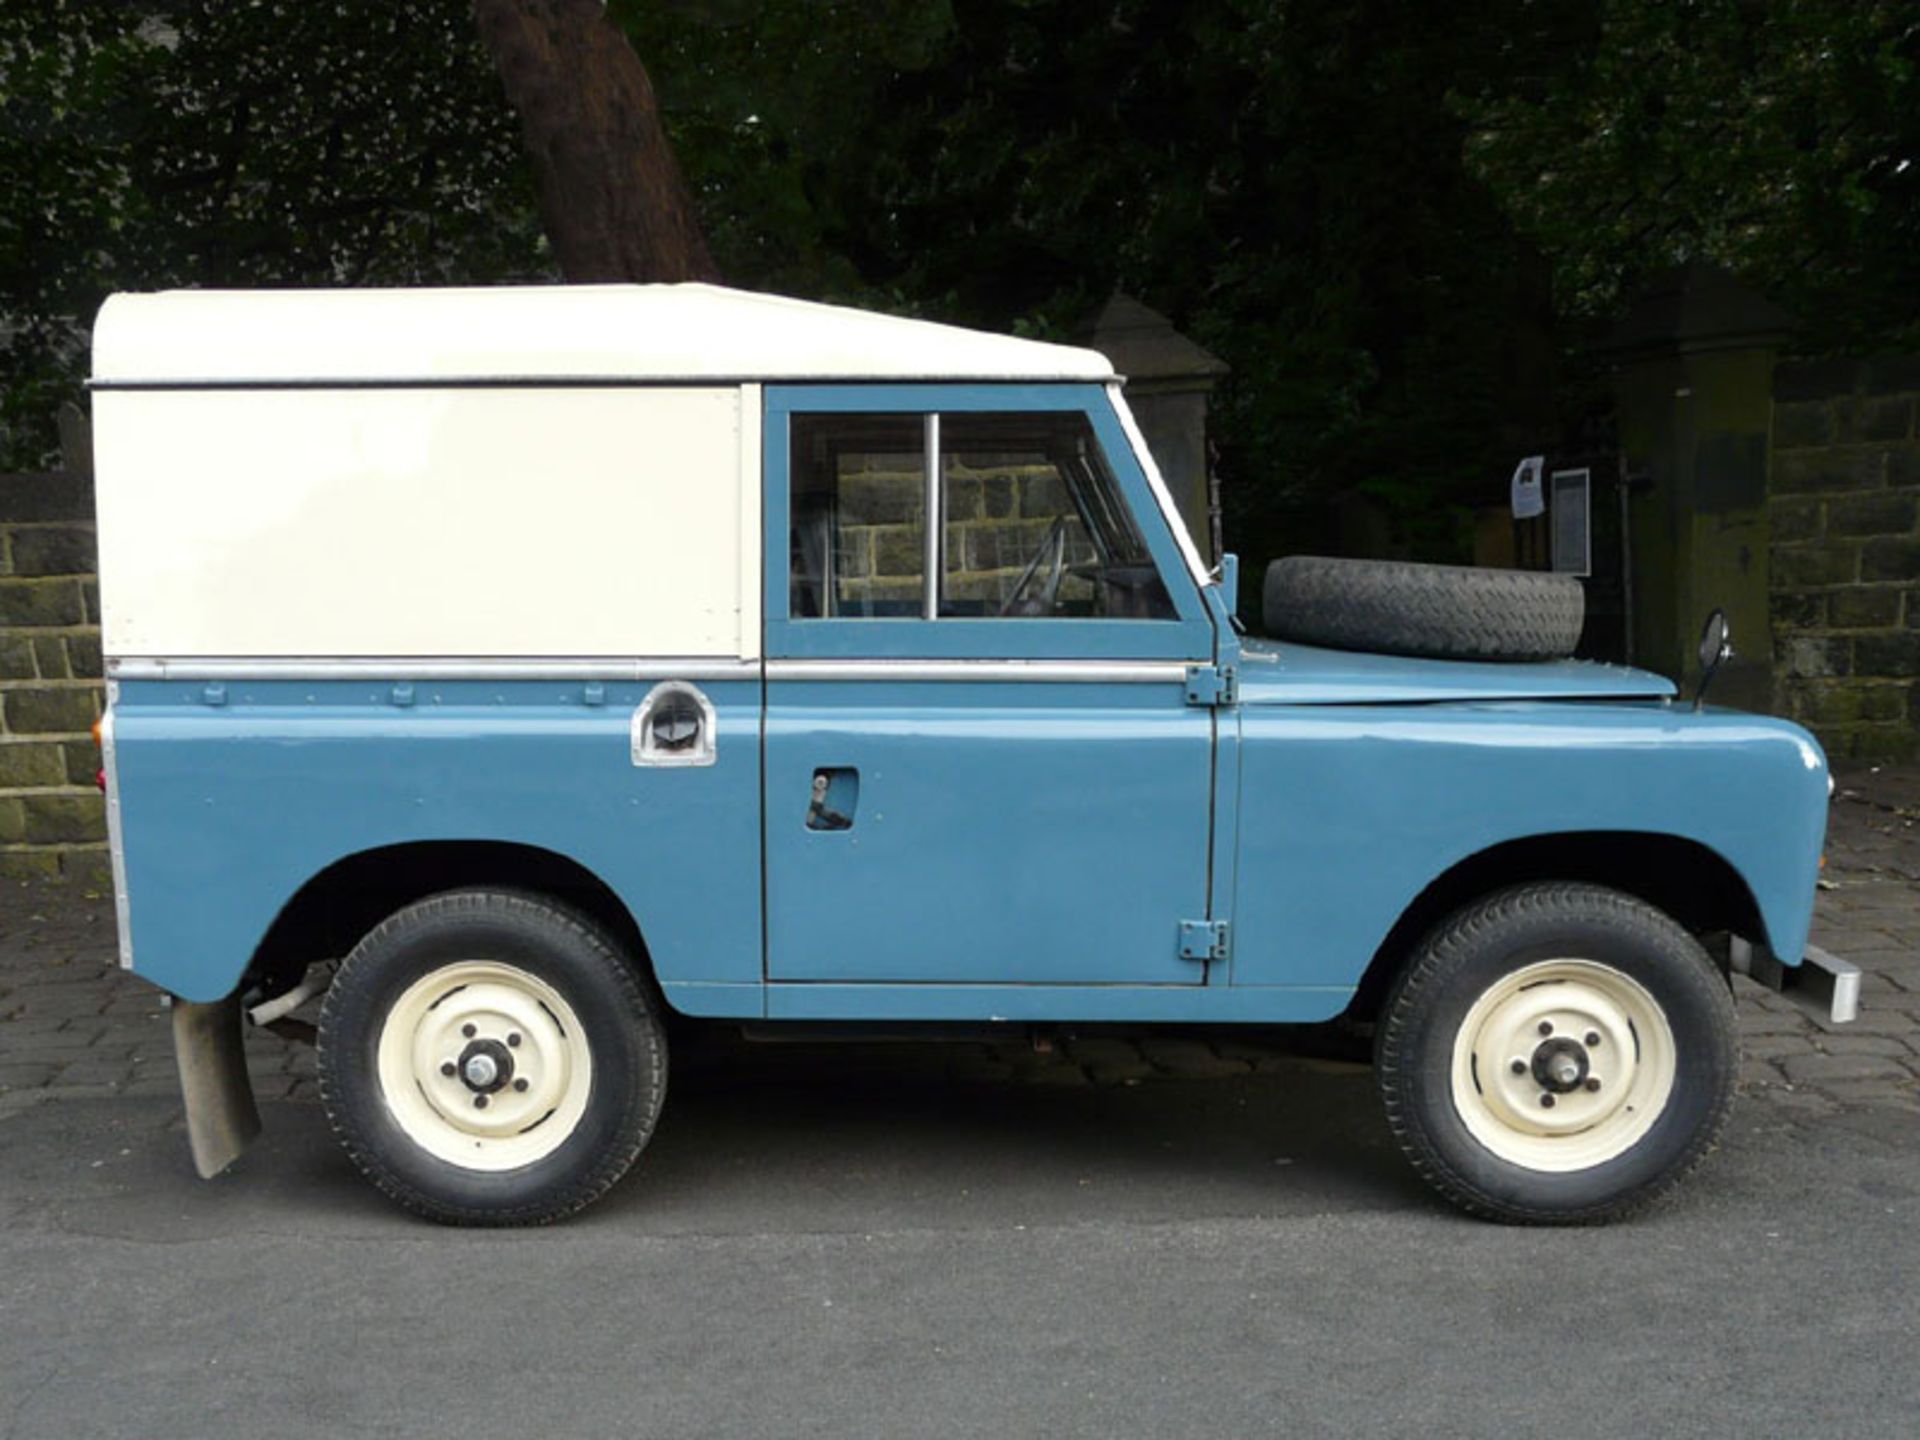 1975 Land Rover 88 Series III - Image 2 of 6